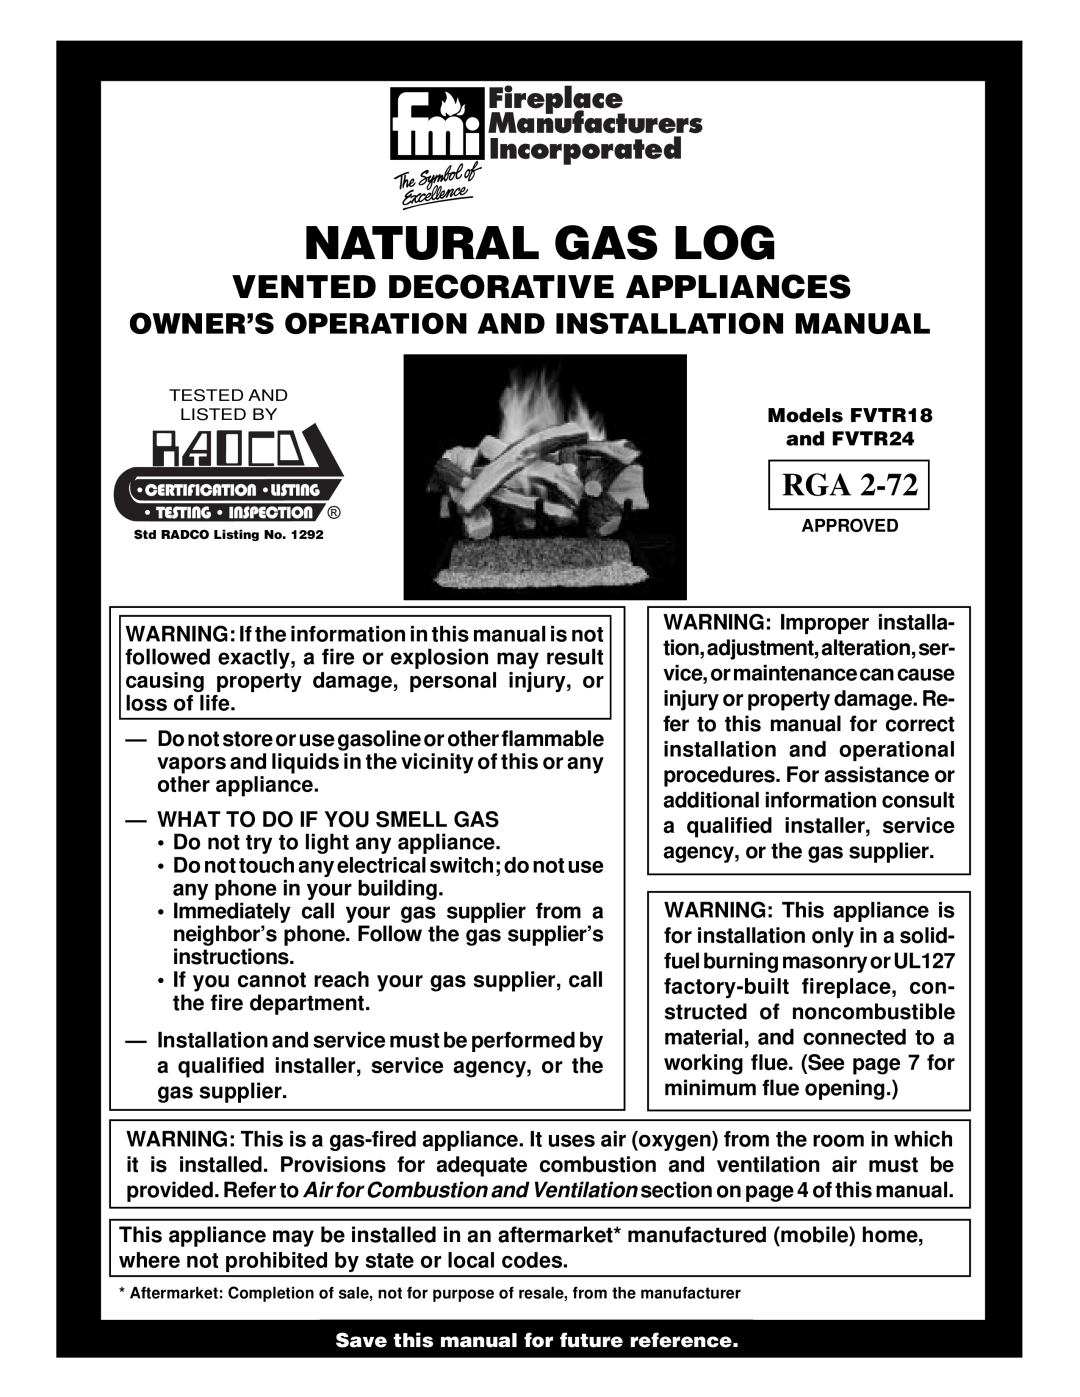 FMI FVTR24 installation manual Vented Decorative Appliances, Owner’S Operation And Installation Manual, Natural Gas Log 